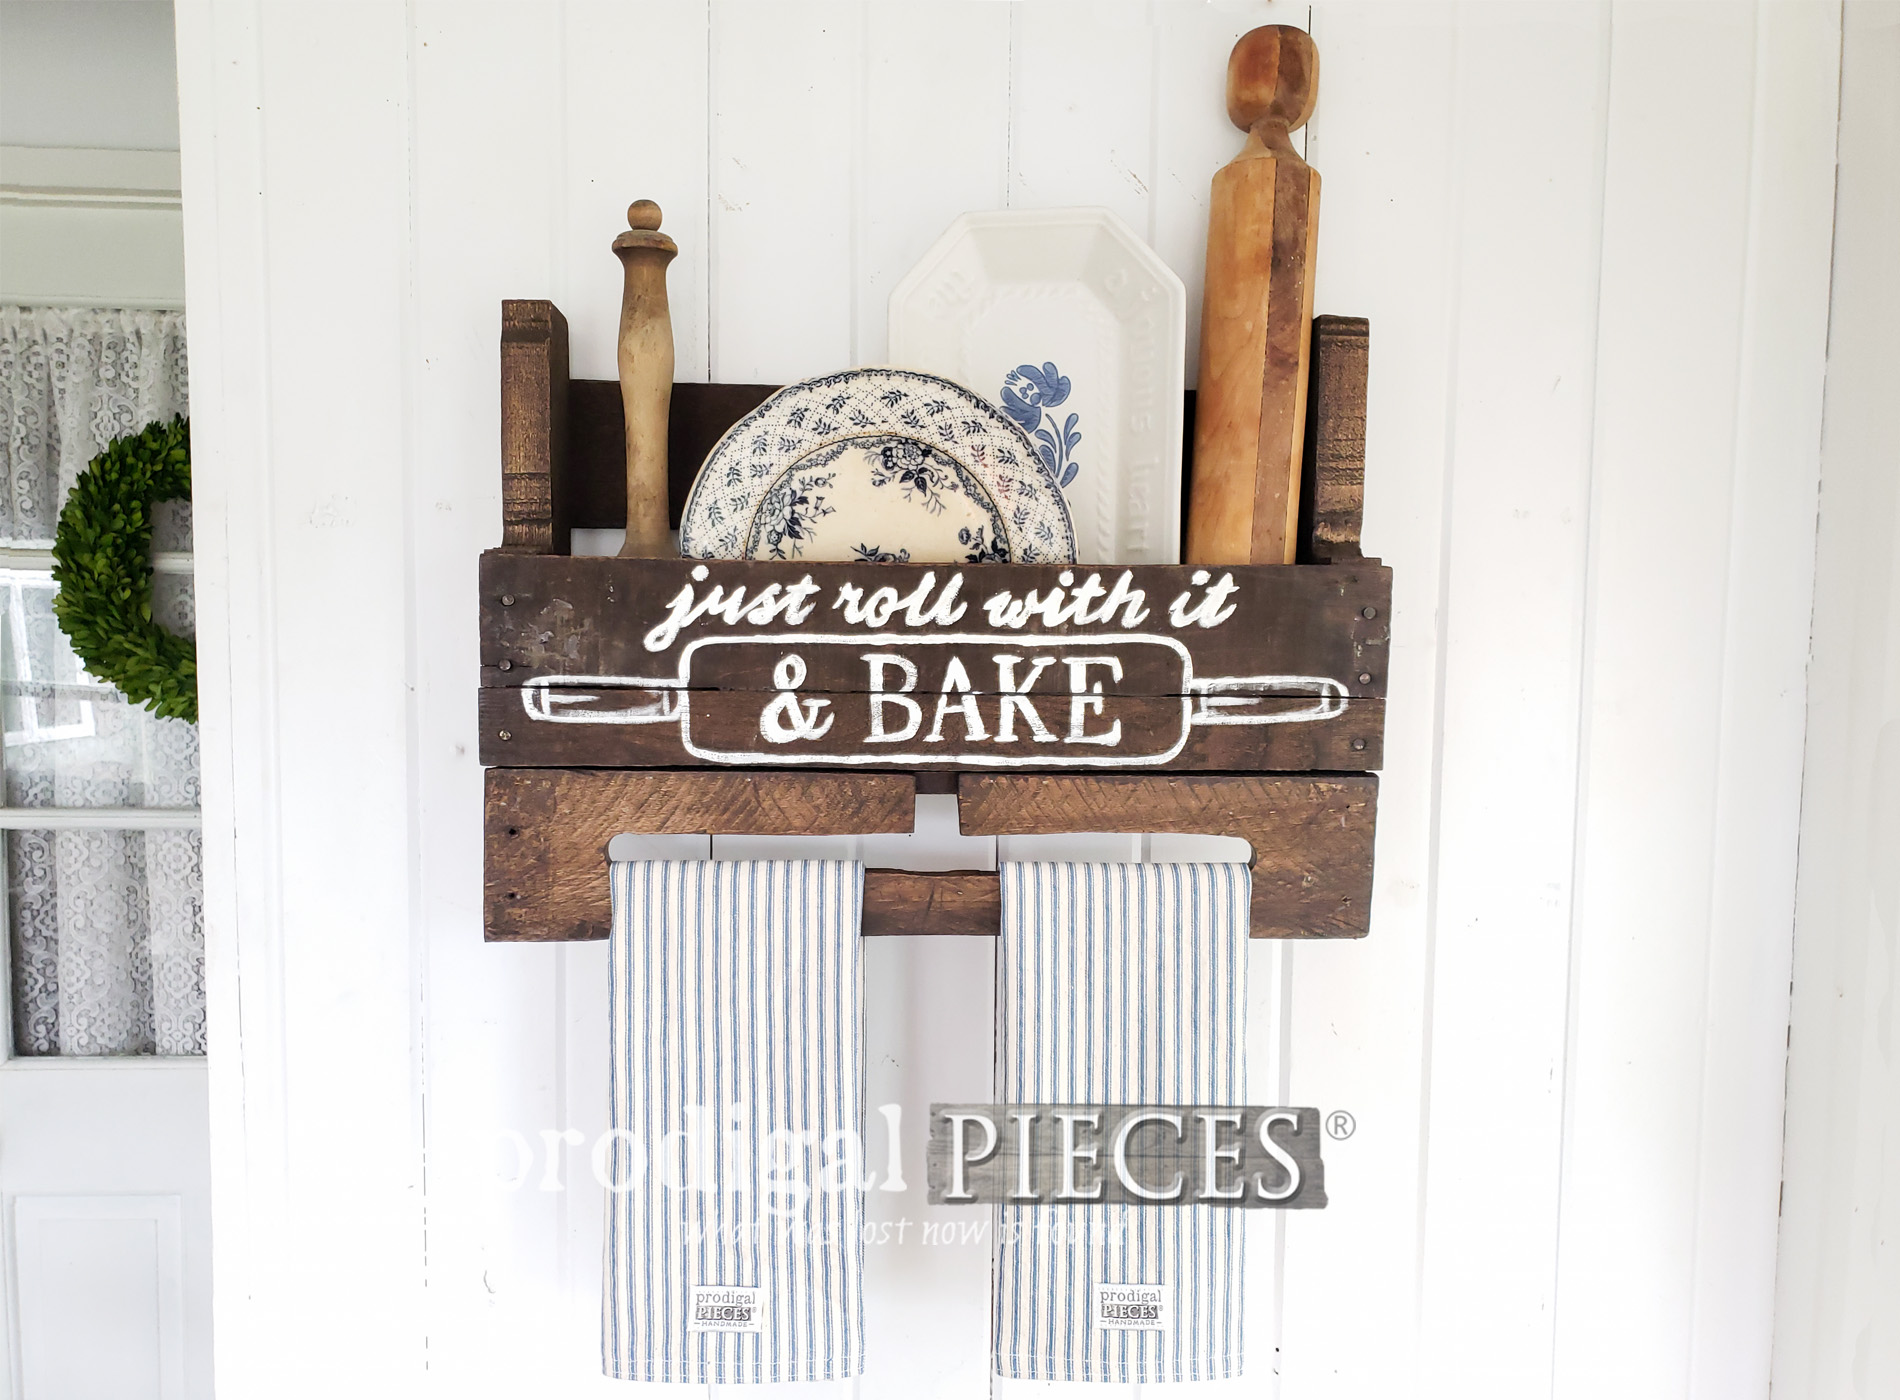 Featured Upcycled Pallet from Wine Rack to Farmhouse Towel Rack with Storage by Prodigal Pieces | Get the DIY details at prodigalpieces.com #prodigalpieces #diy #upcycled #home #homedecor #farmhouse #handmade